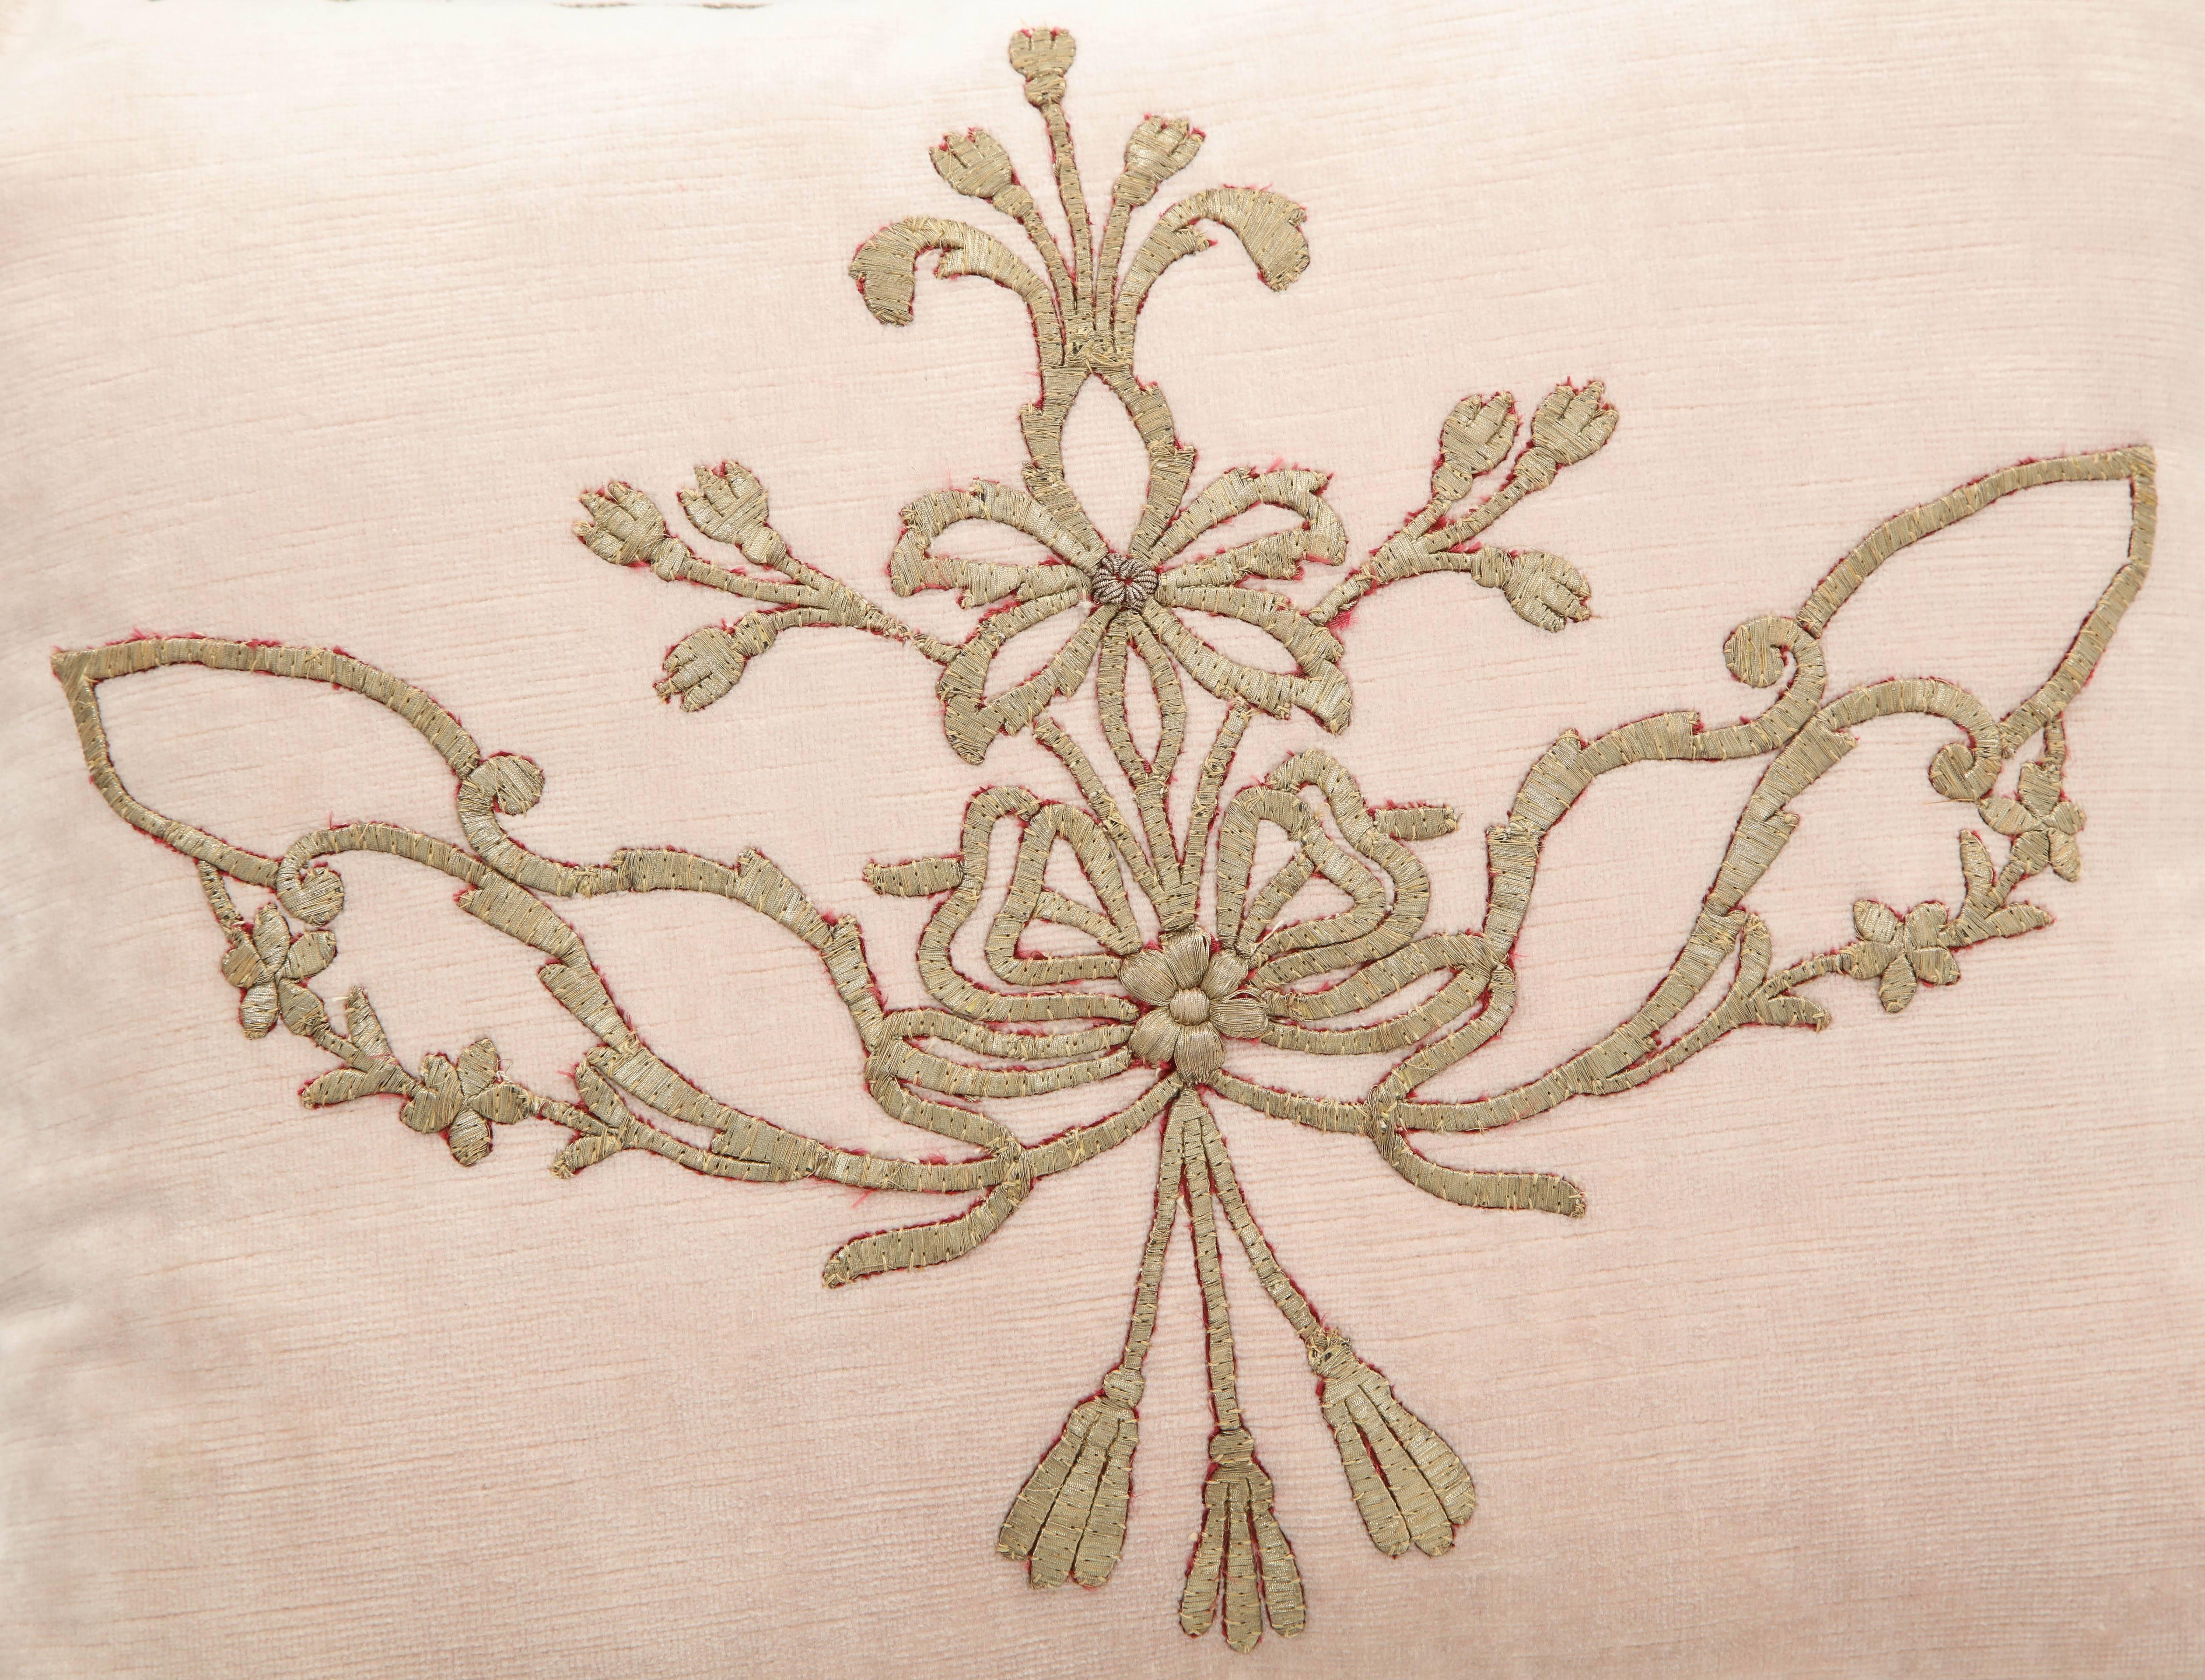 A lovely cushion from B. Viz design crafted on antique Ottoman Empire metallic embroidery on blush pink velvet; hand trimmed with silver metallic cord.